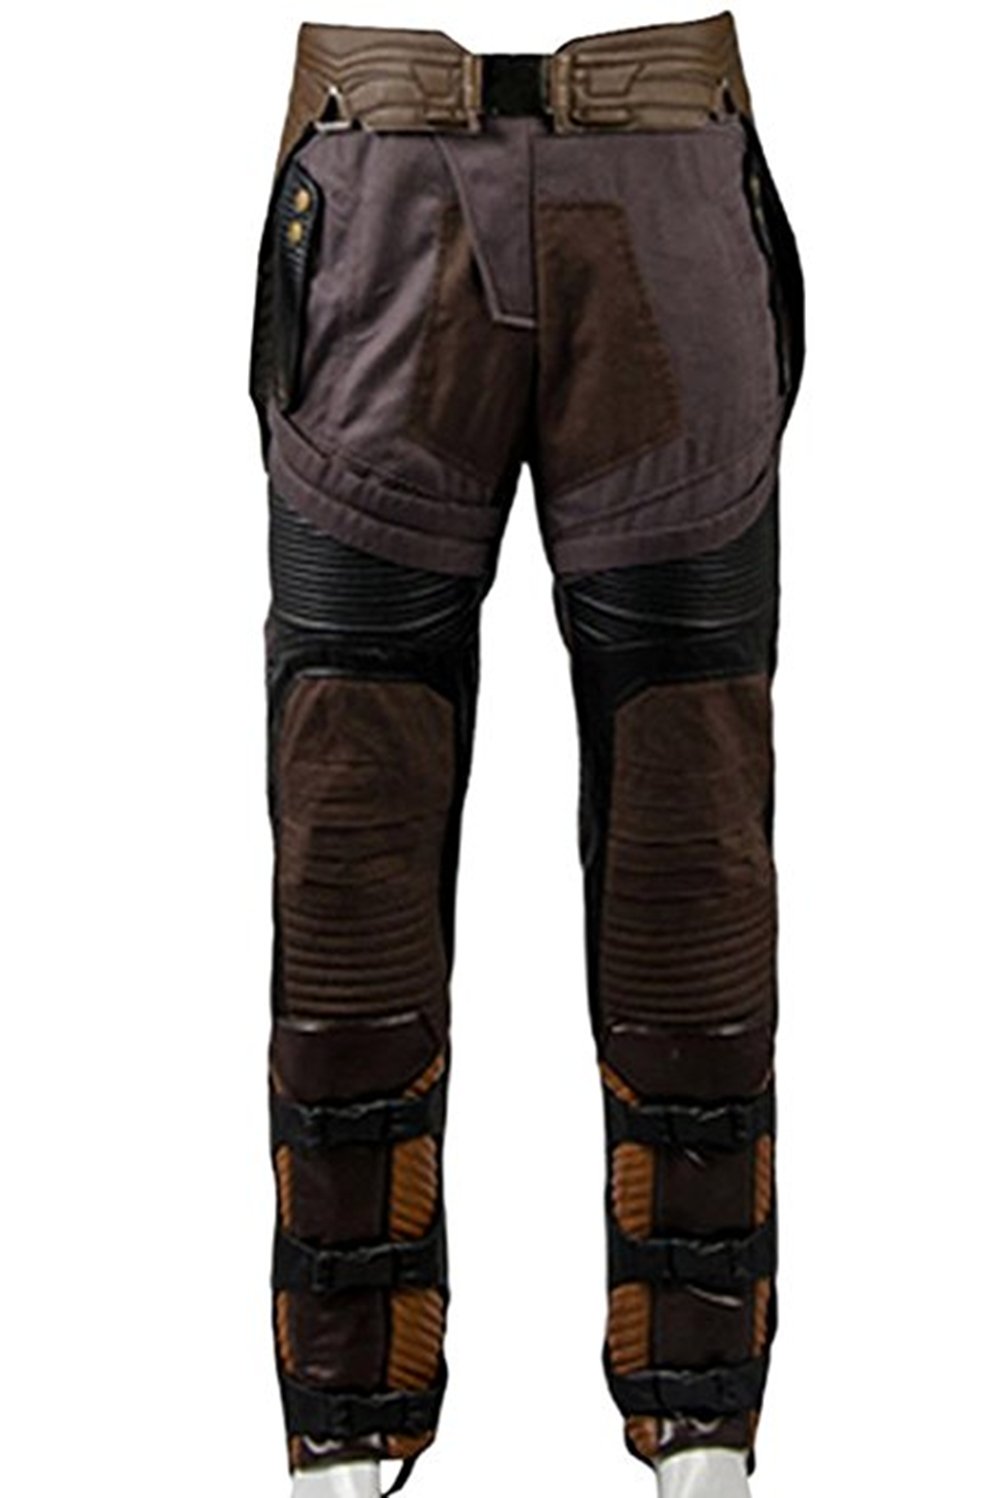 Guardians of the Galaxy 2 Peter Jason Quill Starlord Pants Only Cosplay Costume Fancy Outfit Halloween Carnival Suit